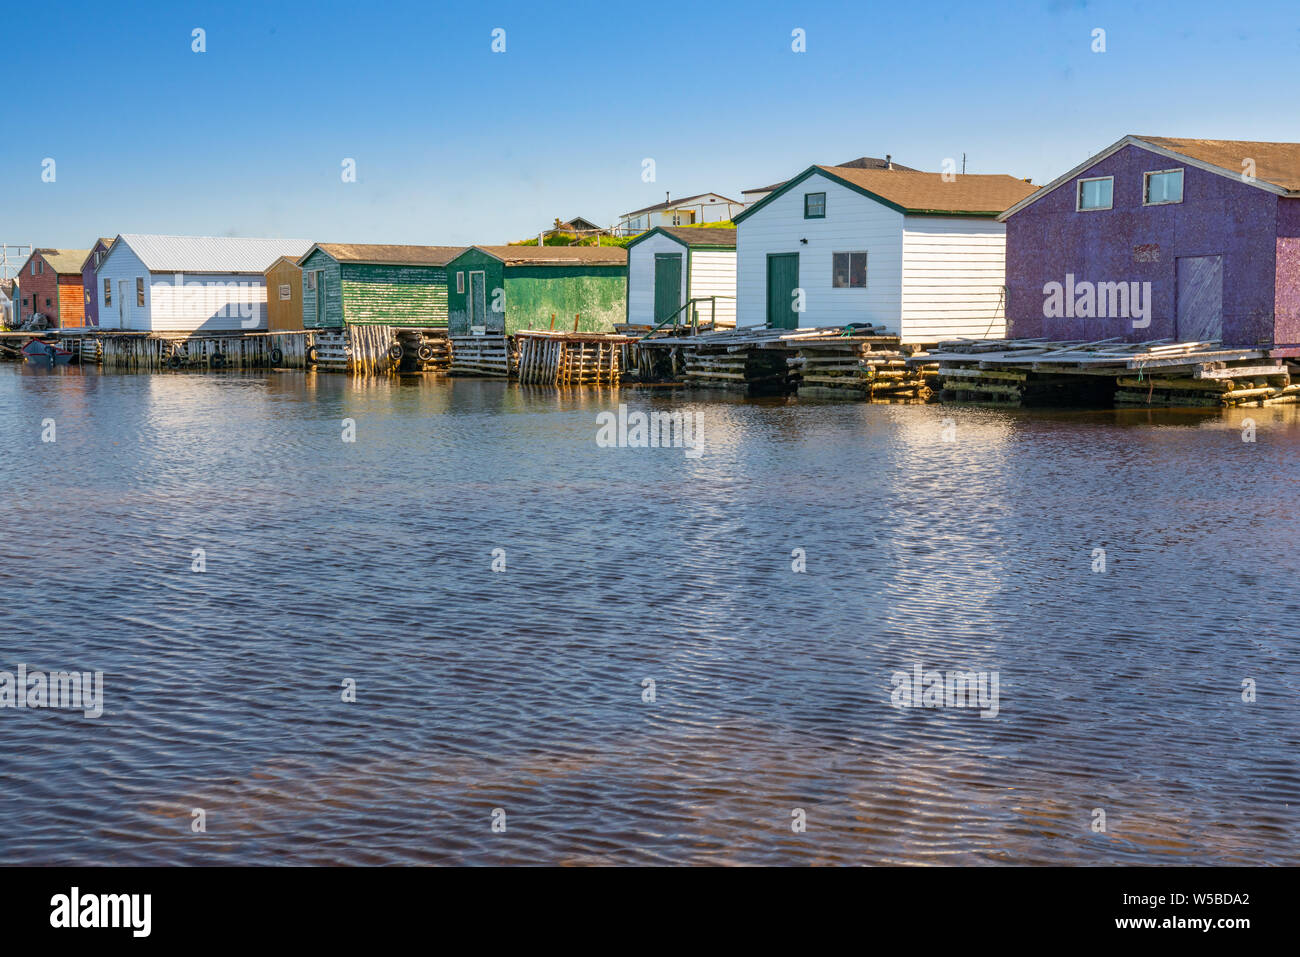 Colorful old fishing sheds along the ocean in Newfoundland, Canada Stock Photo